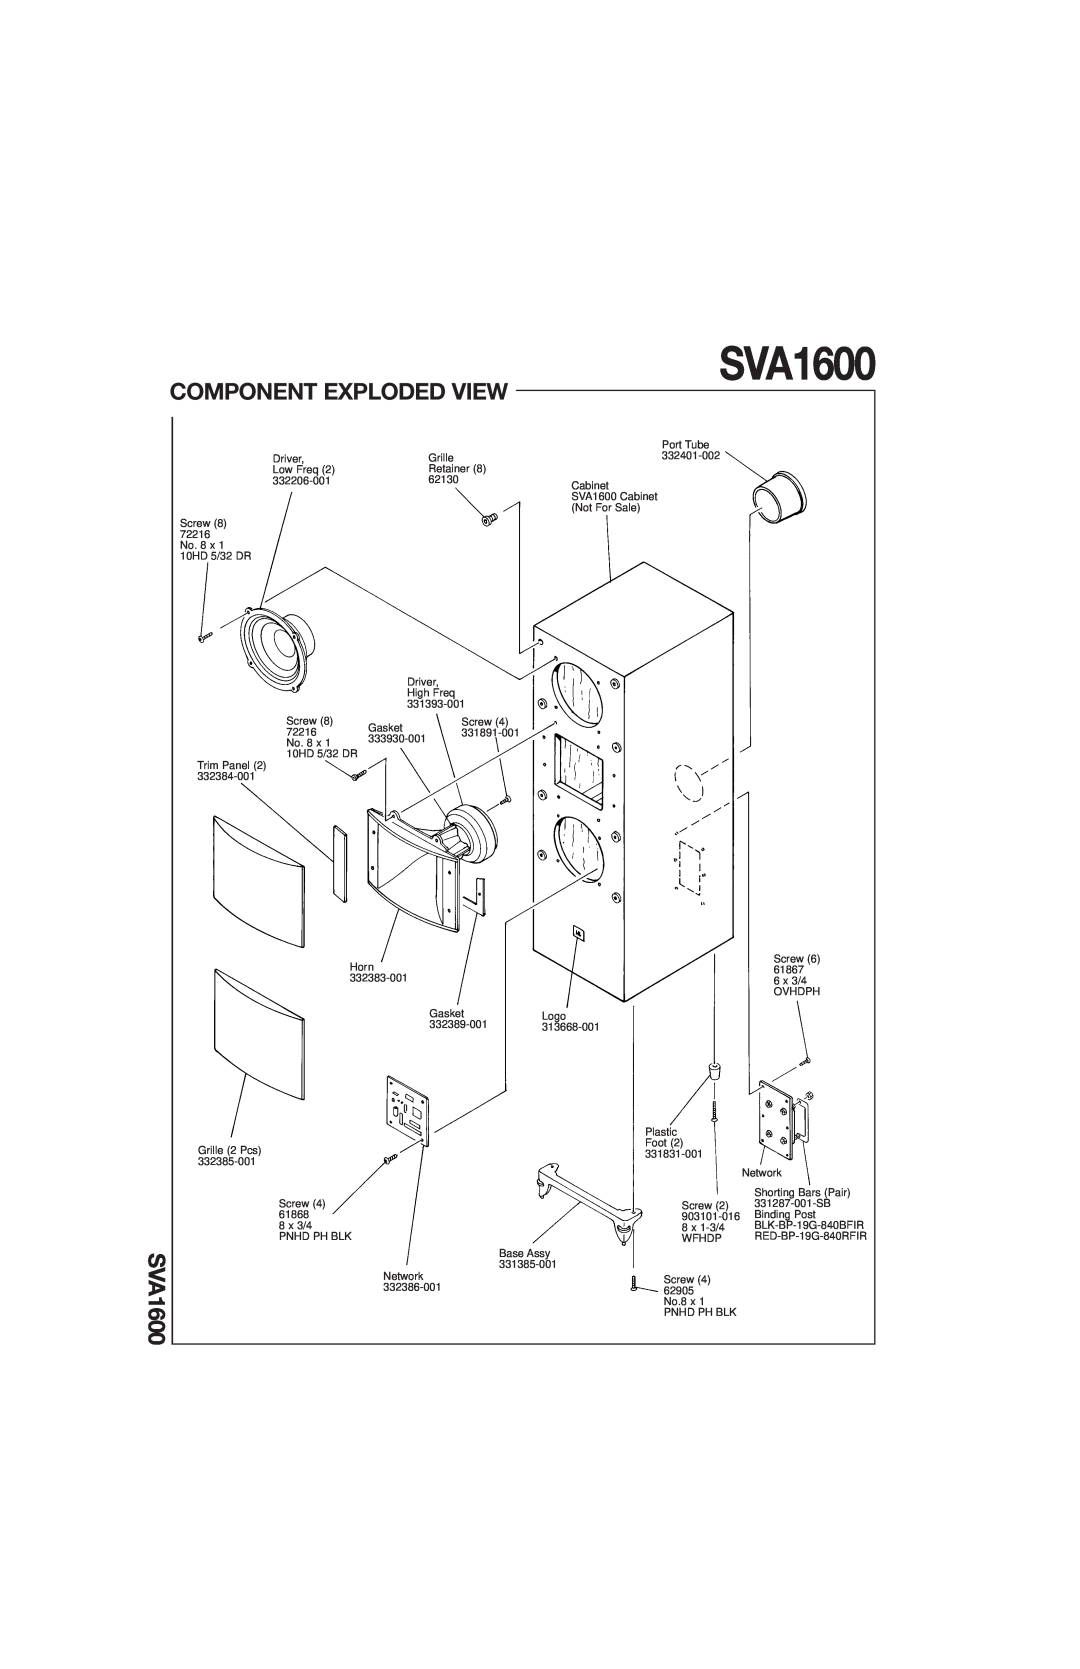 JBL SVA1600 technical manual Component Exploded View 